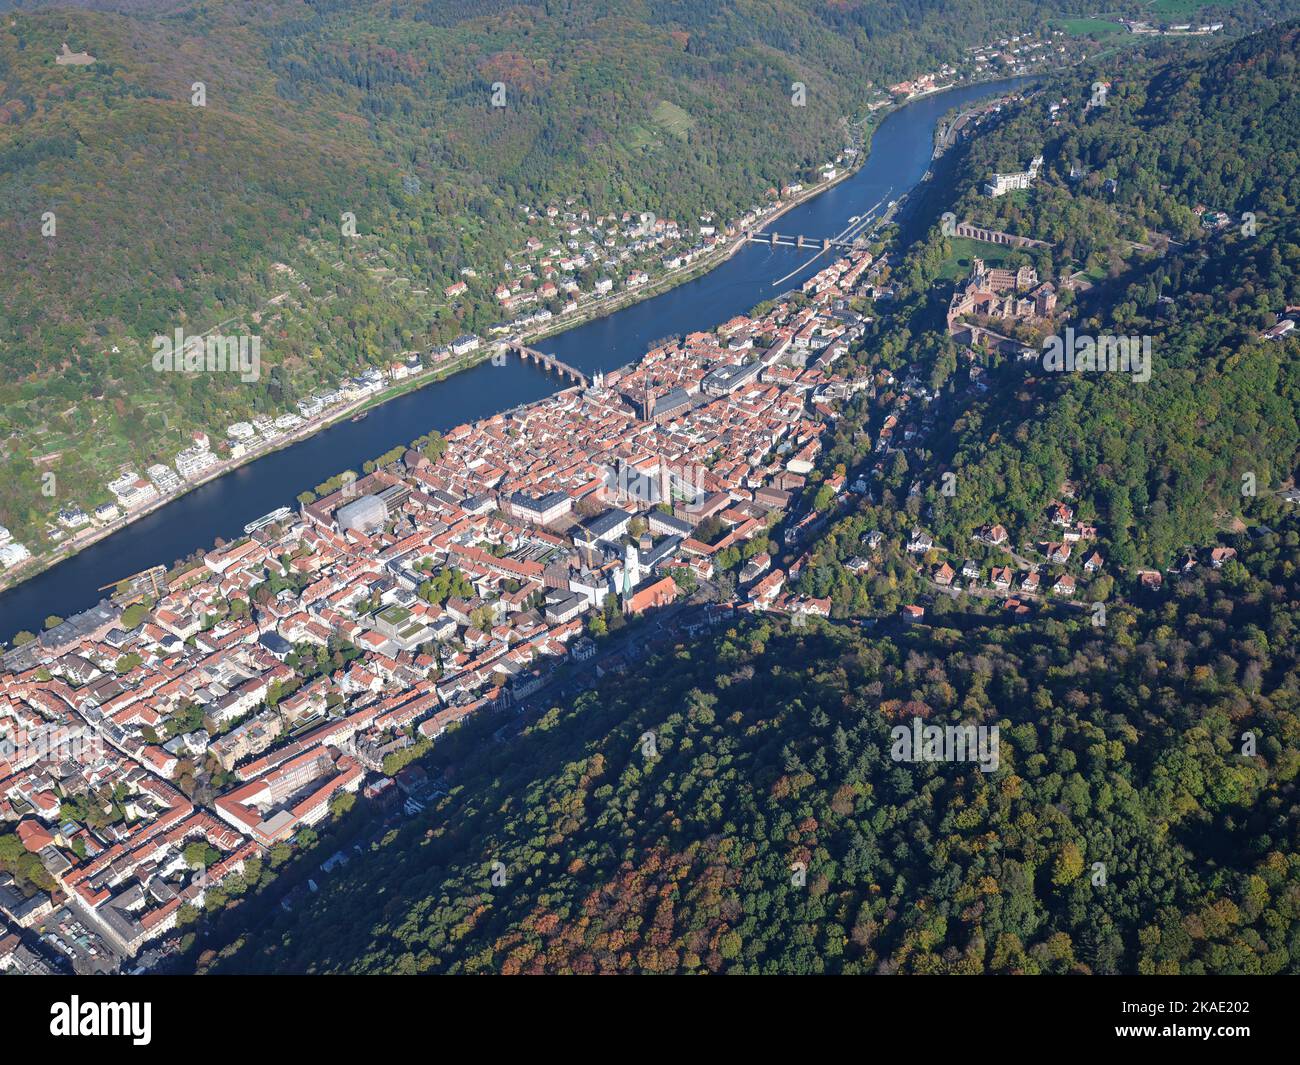 AERIAL VIEW. The old town of Heidelberg on the left bank of the Neckar River with its medieval castle on the hillside. Baden-Württemberg, Germany. Stock Photo